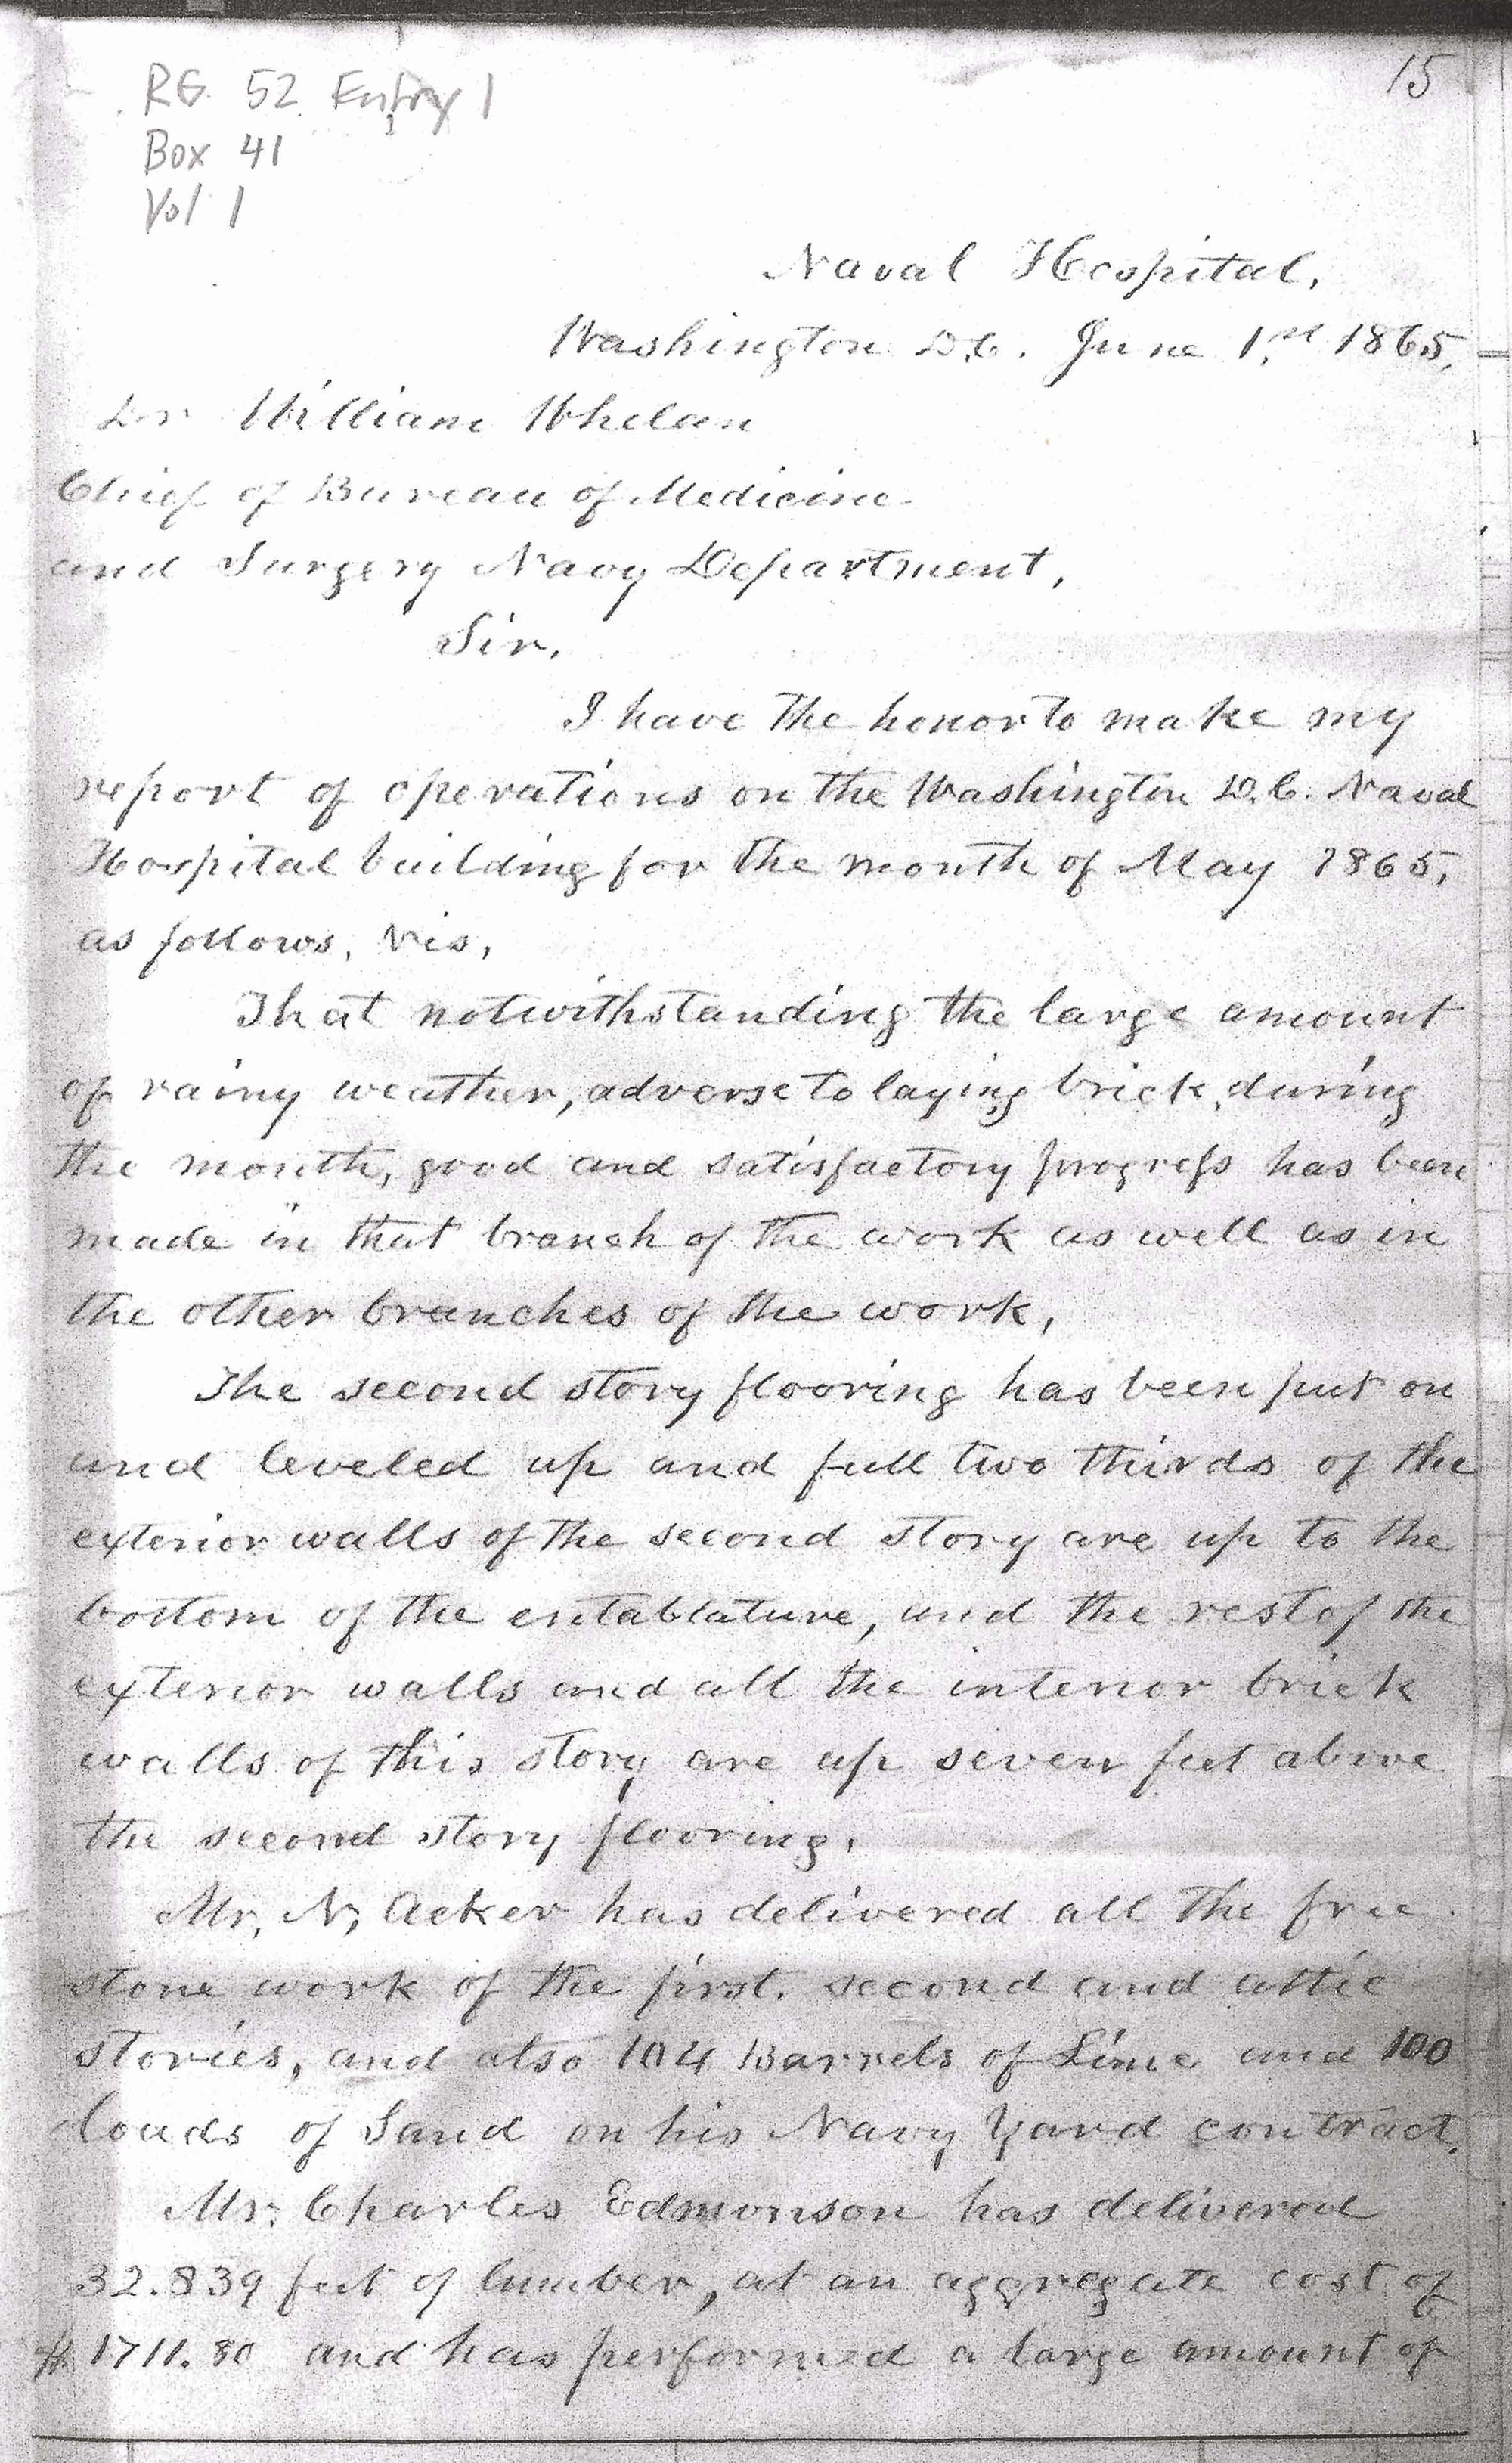 Monthly Report of the Superintendent of Construction, June 1, 1865, Page 1 of 2